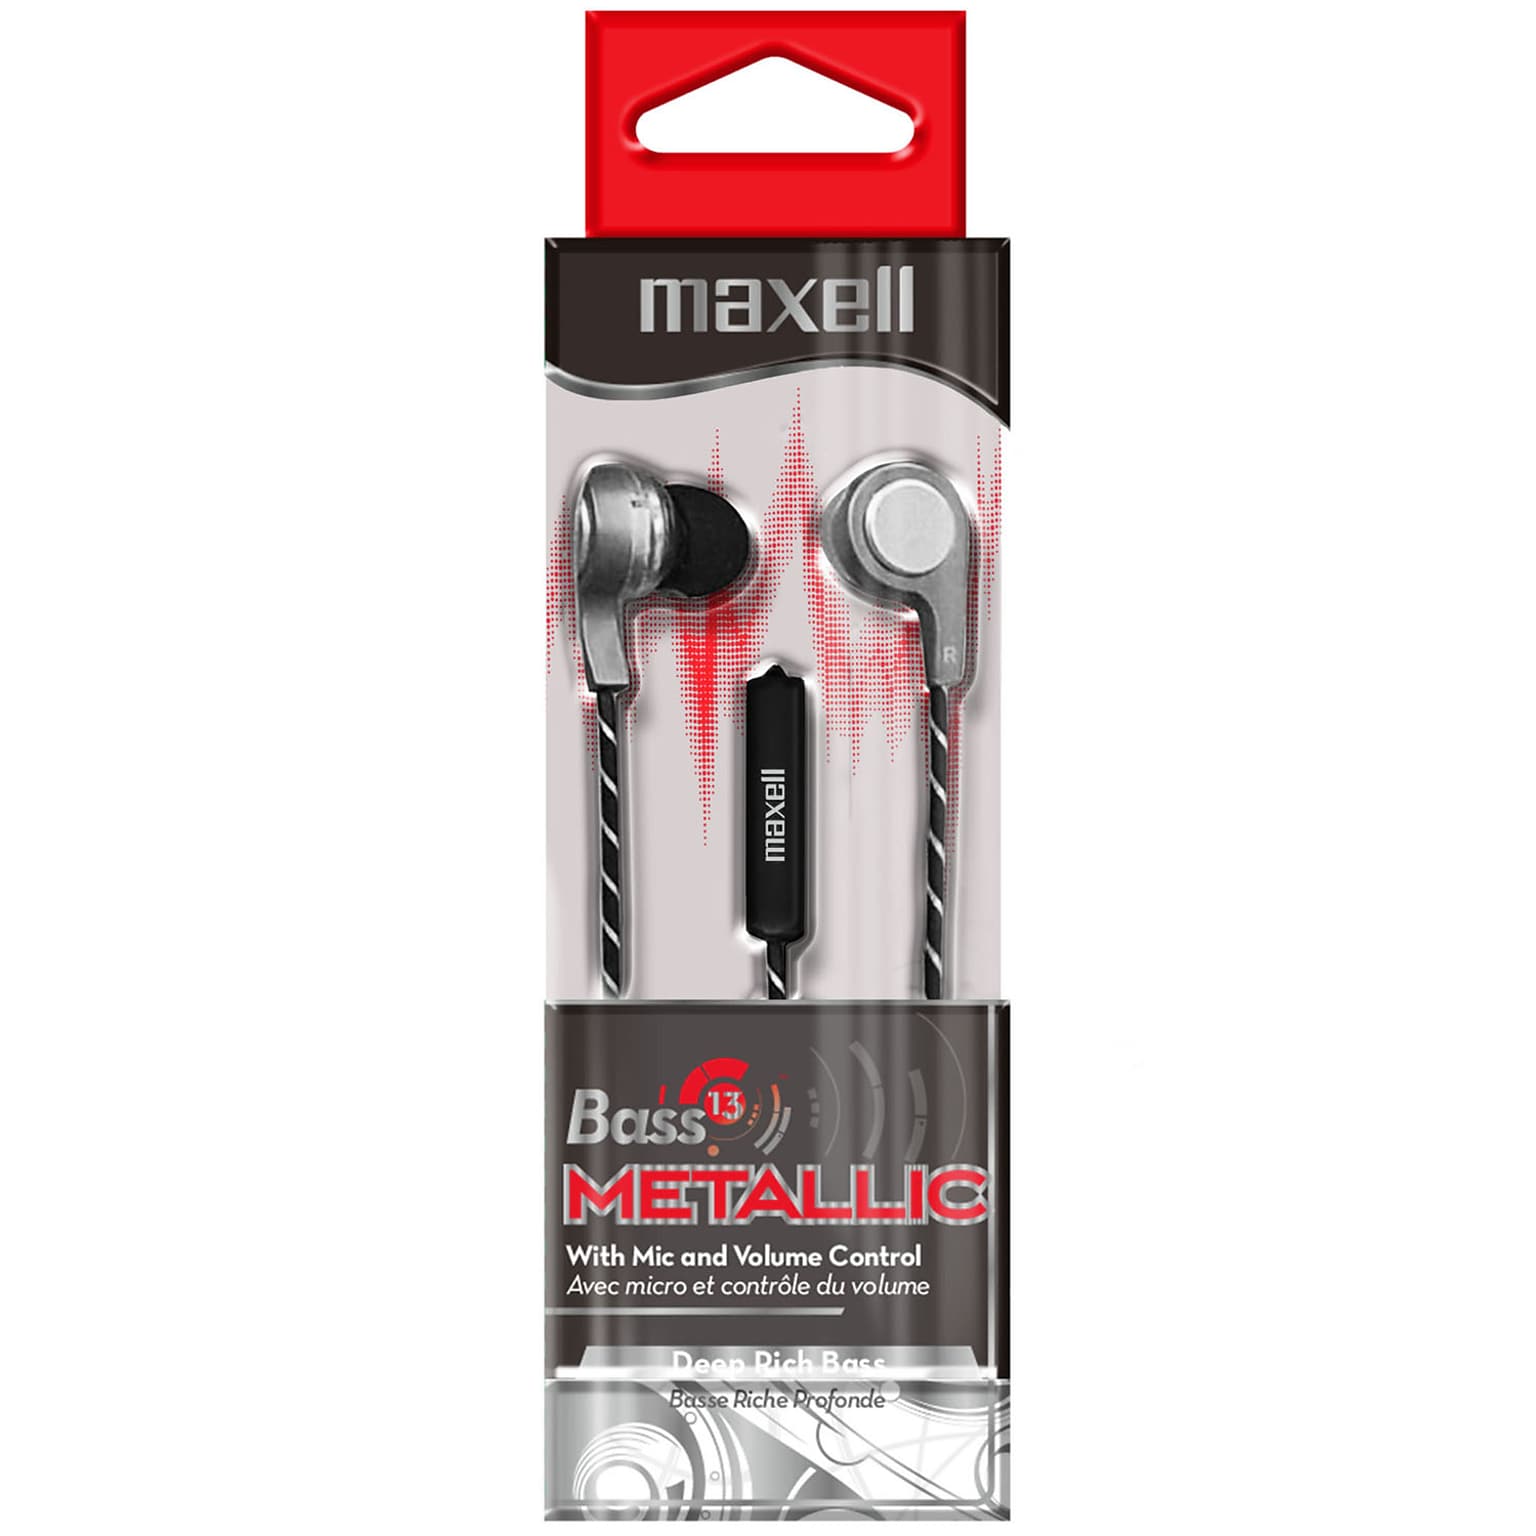 Maxell Bass13™ Metallic Earbuds with Mic & Volume Control (MAX199600)